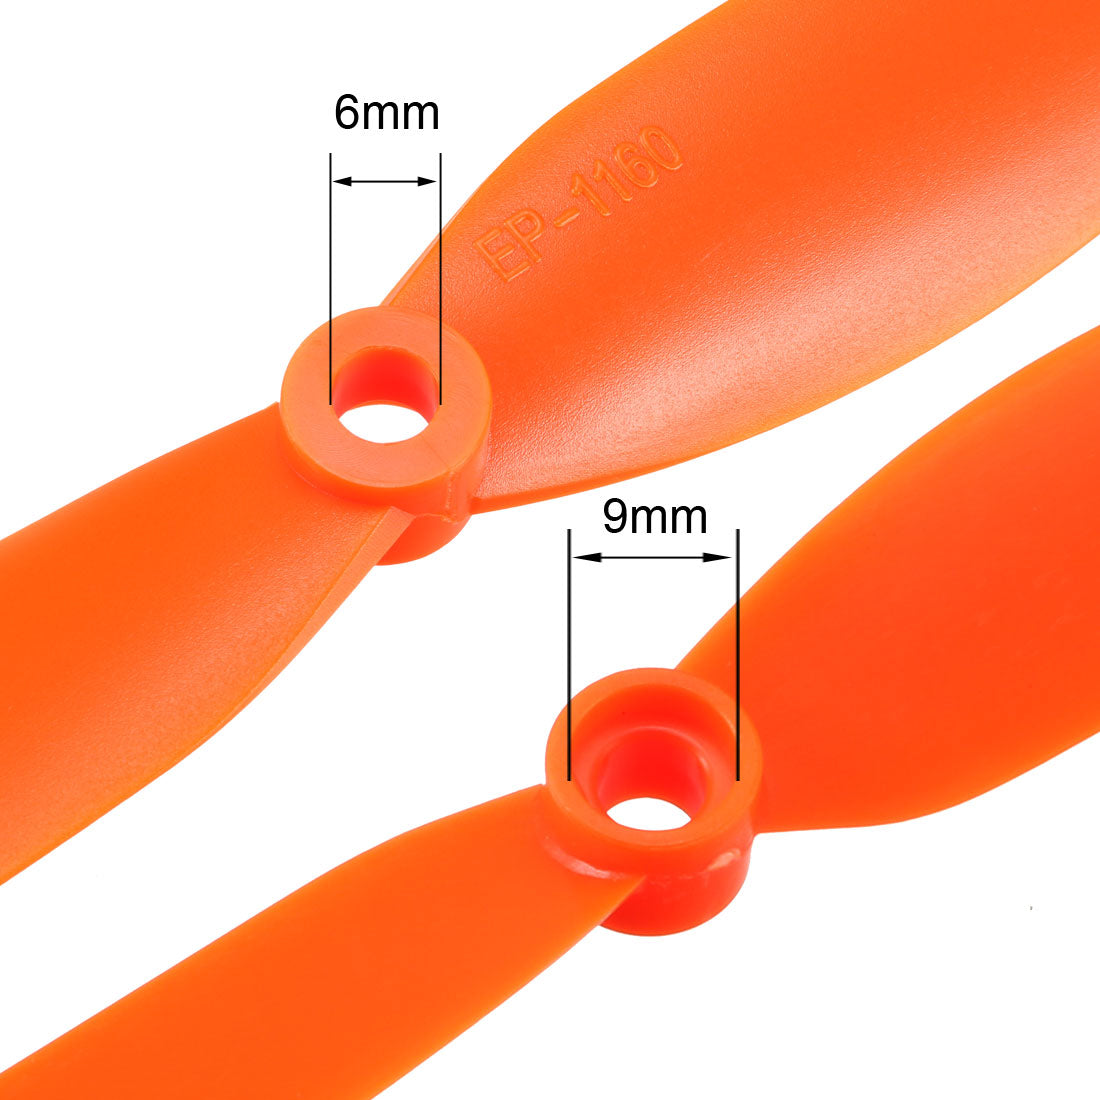 uxcell Uxcell RC Propellers  1160 11x6 Inch 2-Vane Fixed-Wing for Airplane Toy, Nylon Orange 4pcs with Adapter Rings